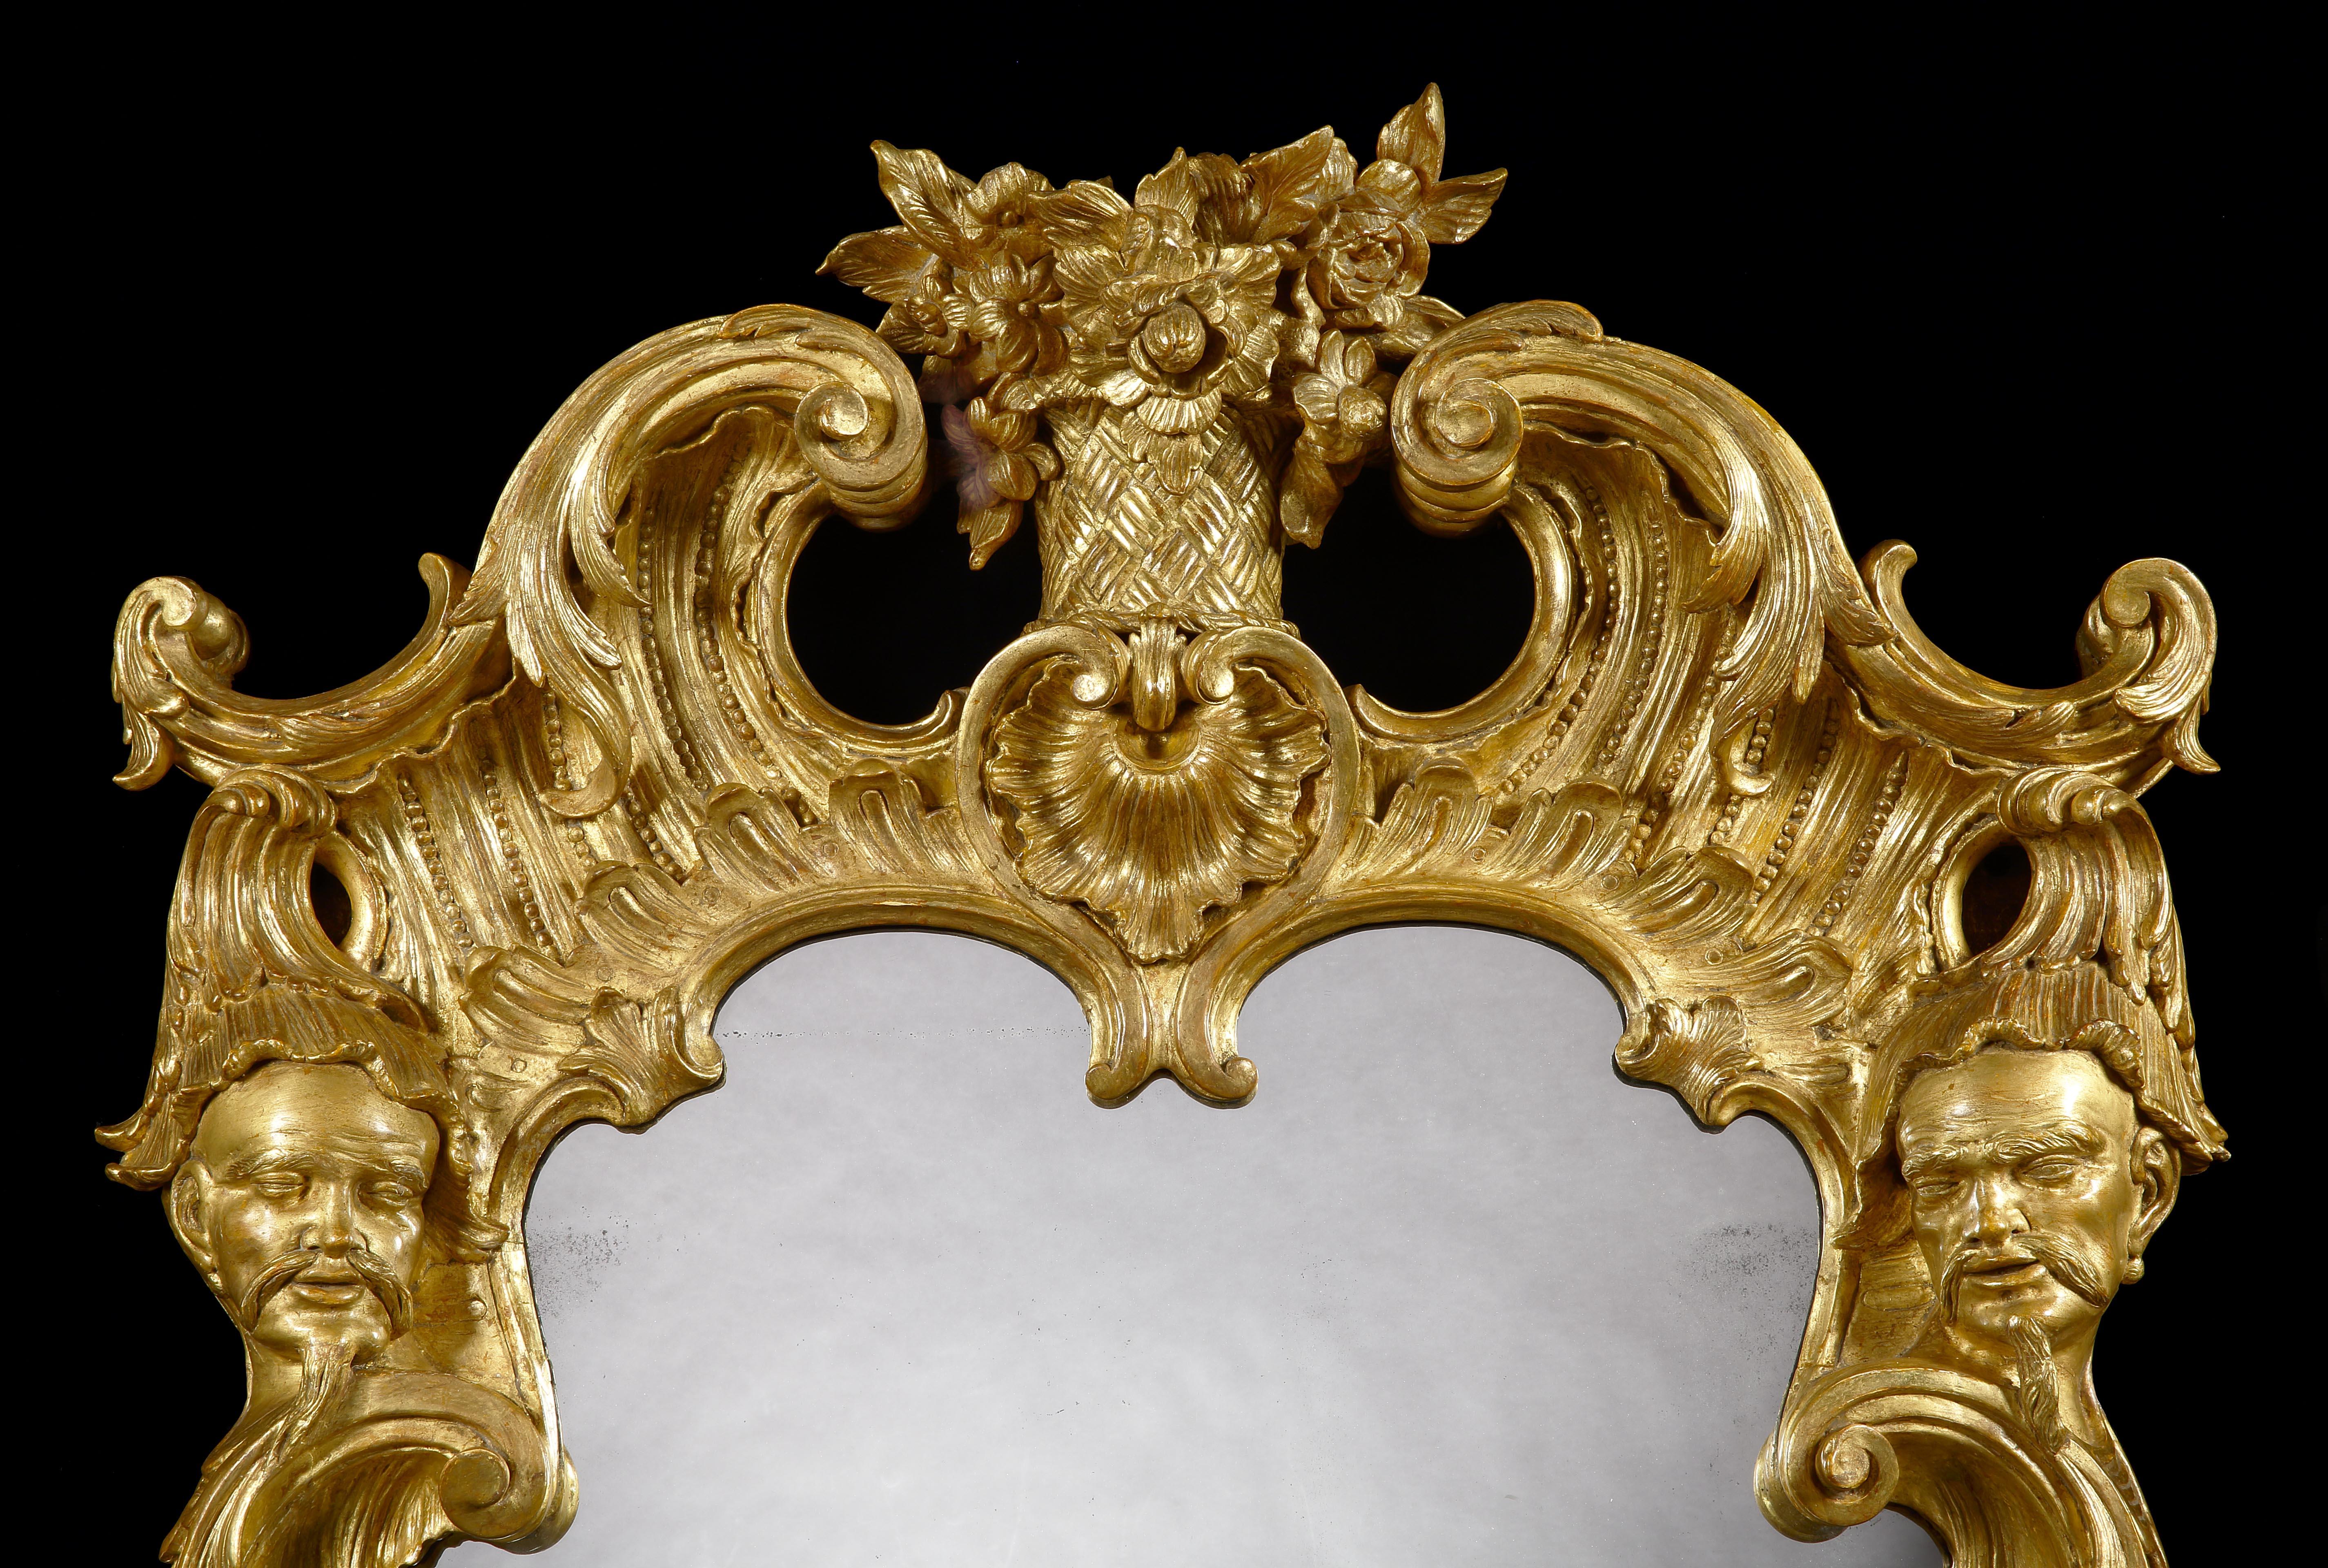 A George II Style Pier Glass in the manner of Matthias Lock

Of rectangular form, constructed in giltwood and gesso, elaborately carved incorporating filigree inner-moulding and floriate branches to the sides; above, a flower basket at the apex is